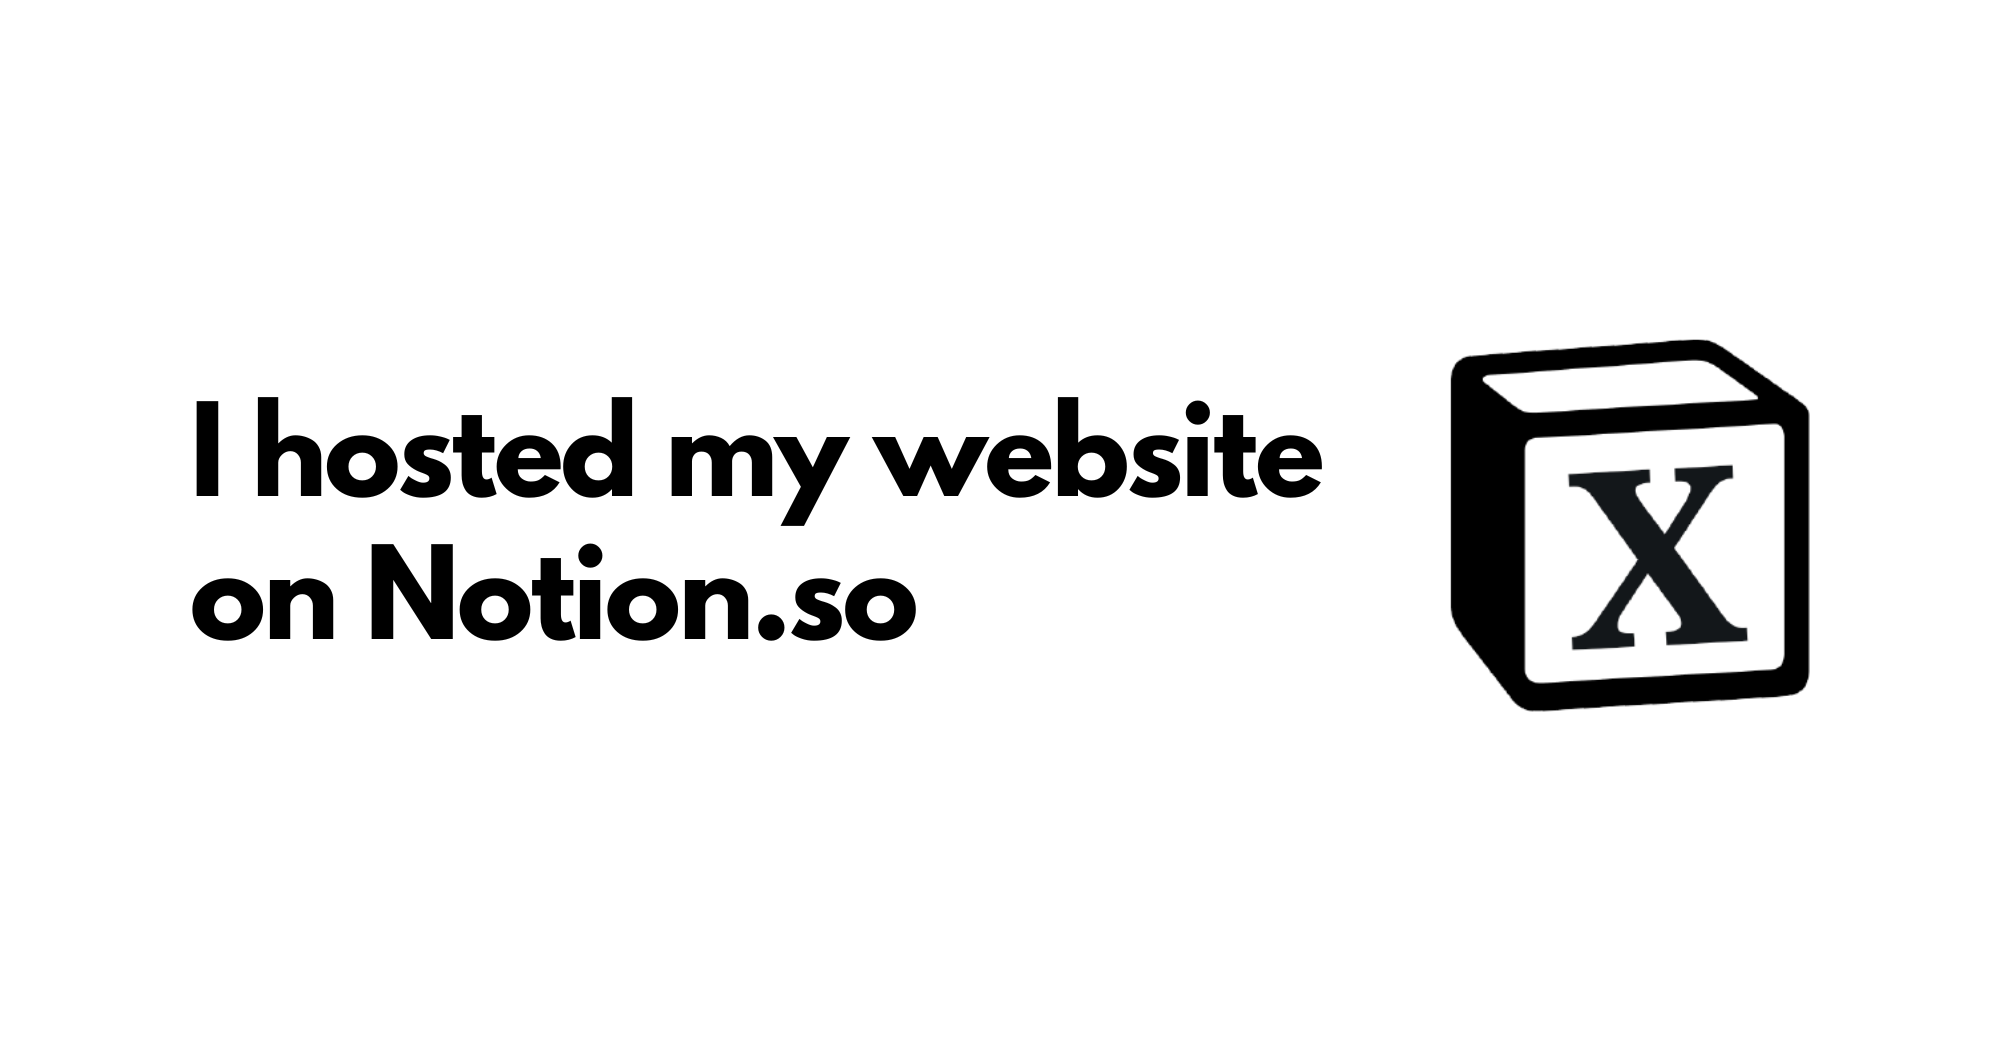 I hosted my website on Notion